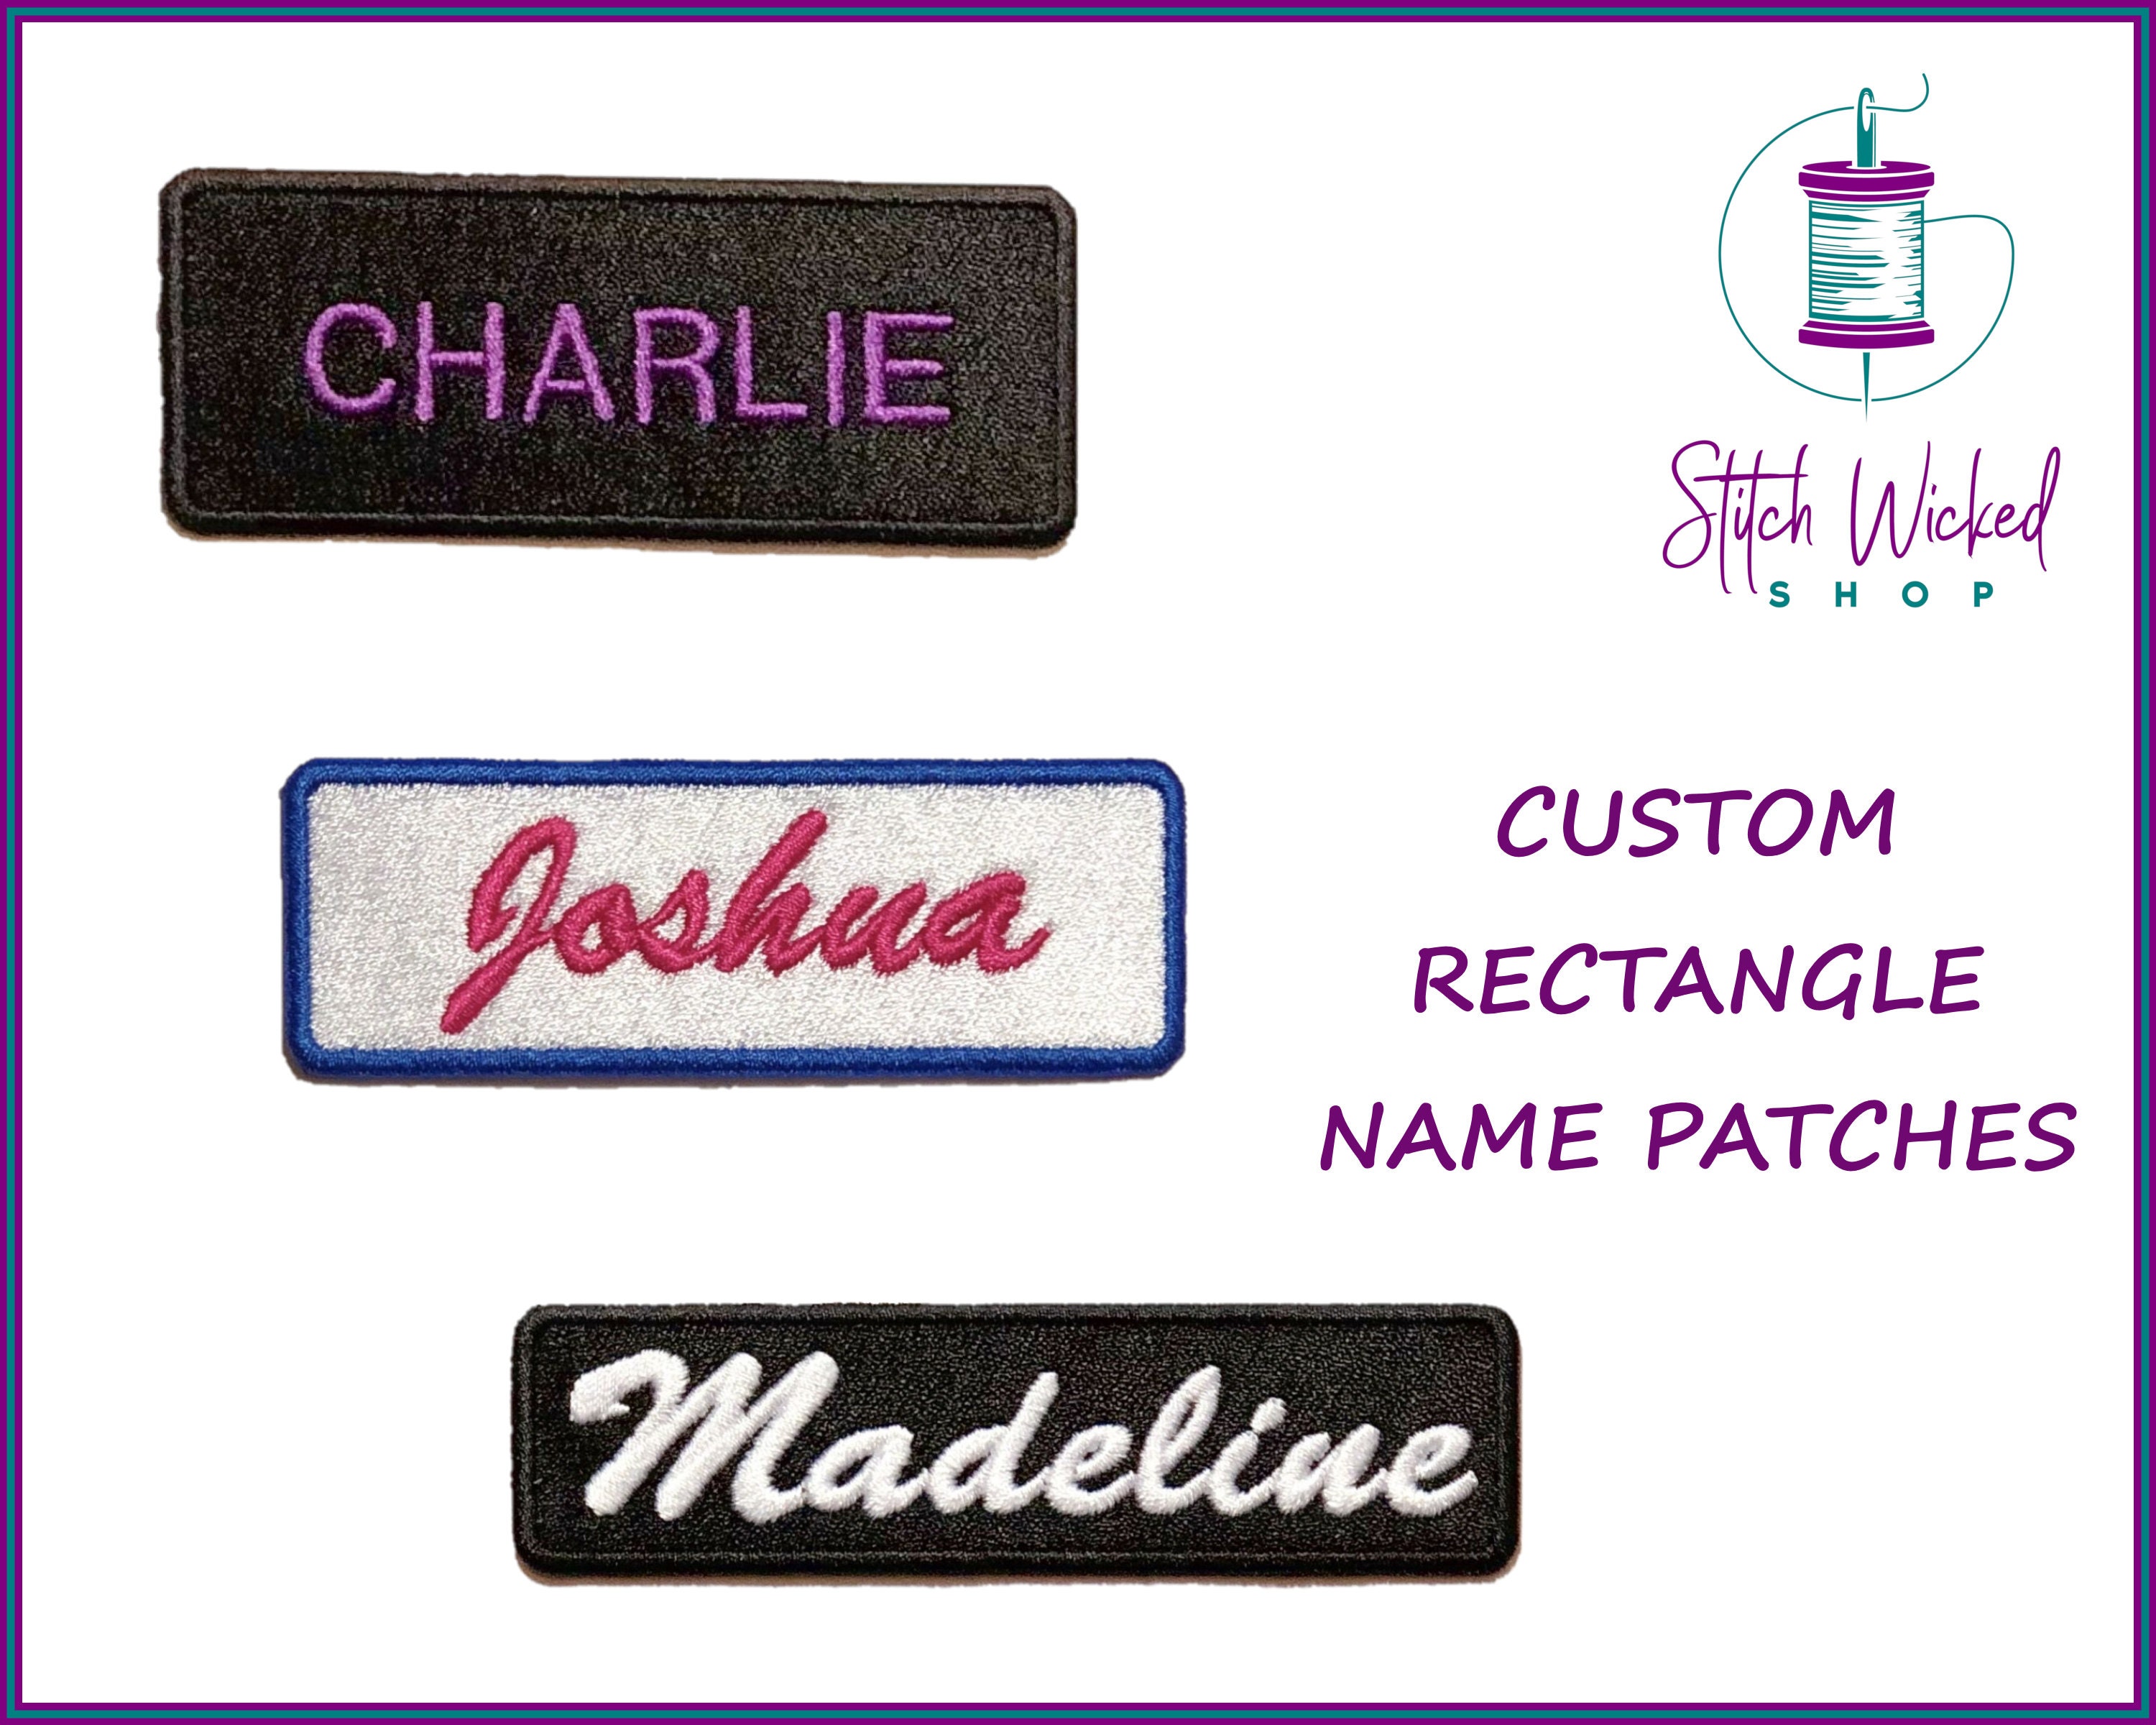 Custom Embroidered Name Patches, Custom Embroidery, Iron on Patch